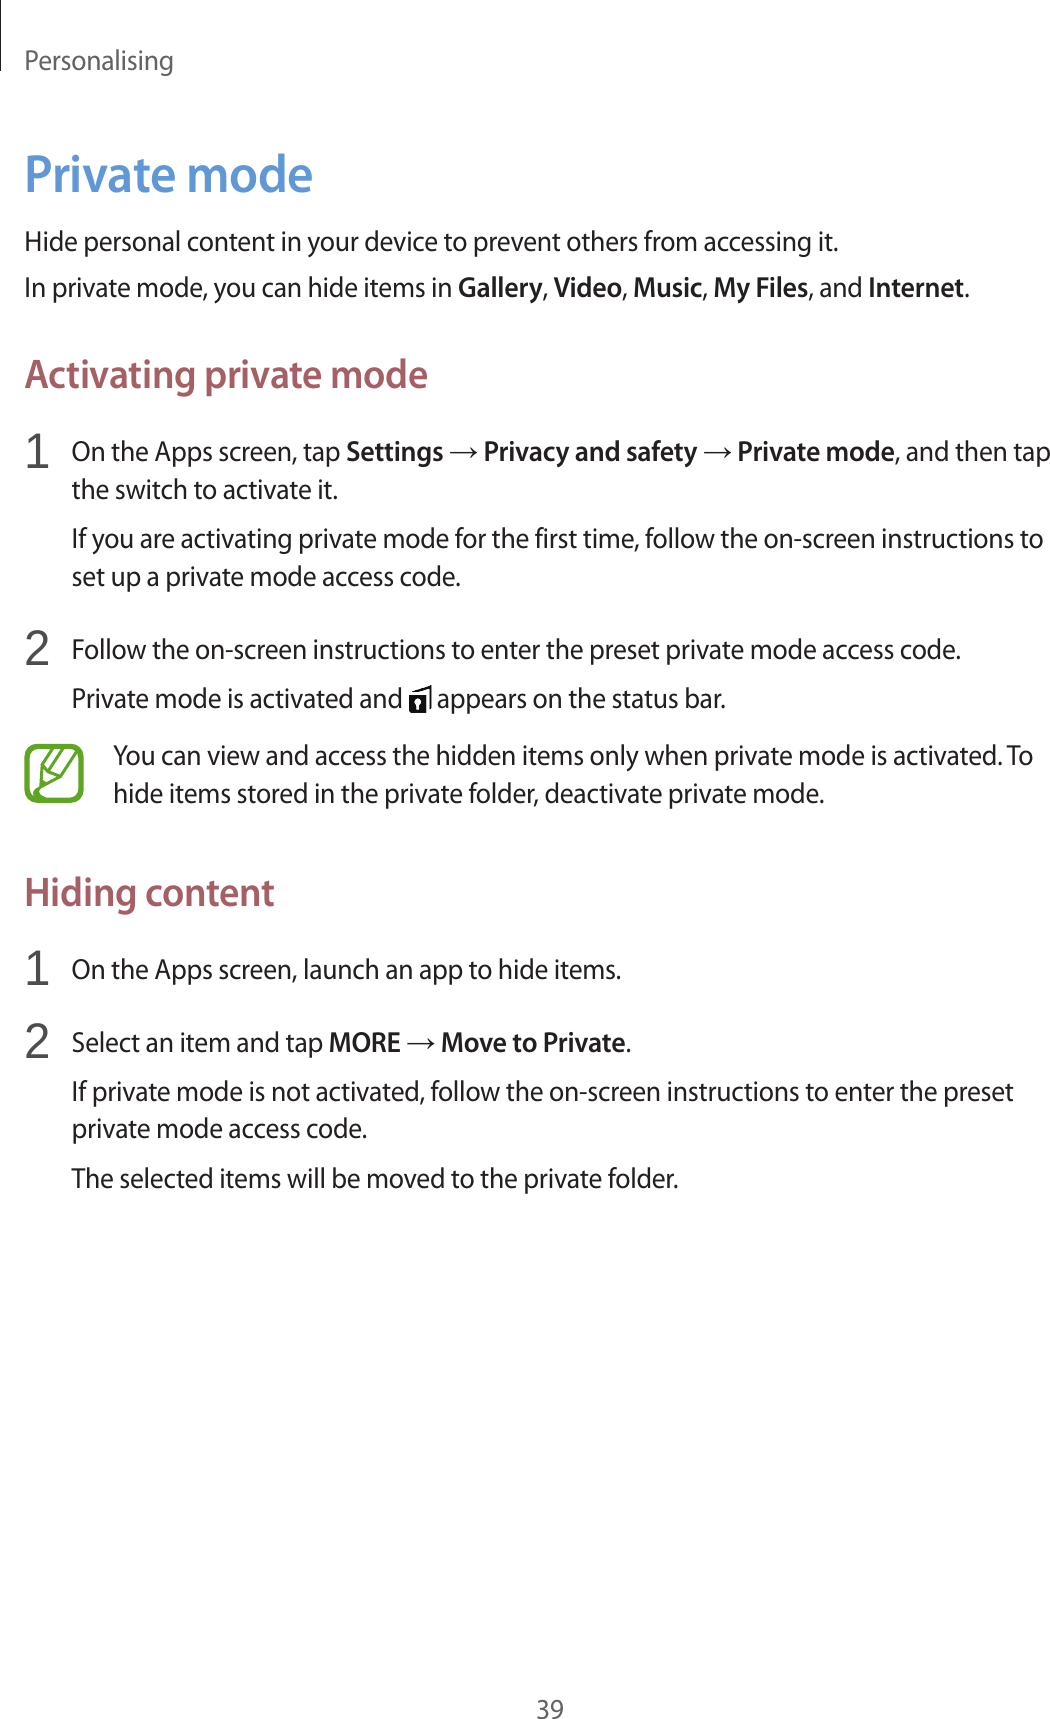 Personalising39Private modeHide personal content in your device to prevent others from accessing it.In private mode, you can hide items in Gallery, Video, Music, My Files, and Internet.Activating private mode1  On the Apps screen, tap Settings → Privacy and safety → Private mode, and then tap the switch to activate it.If you are activating private mode for the first time, follow the on-screen instructions to set up a private mode access code.2  Follow the on-screen instructions to enter the preset private mode access code.Private mode is activated and   appears on the status bar.You can view and access the hidden items only when private mode is activated. To hide items stored in the private folder, deactivate private mode.Hiding content1  On the Apps screen, launch an app to hide items.2  Select an item and tap MORE → Move to Private.If private mode is not activated, follow the on-screen instructions to enter the preset private mode access code.The selected items will be moved to the private folder.